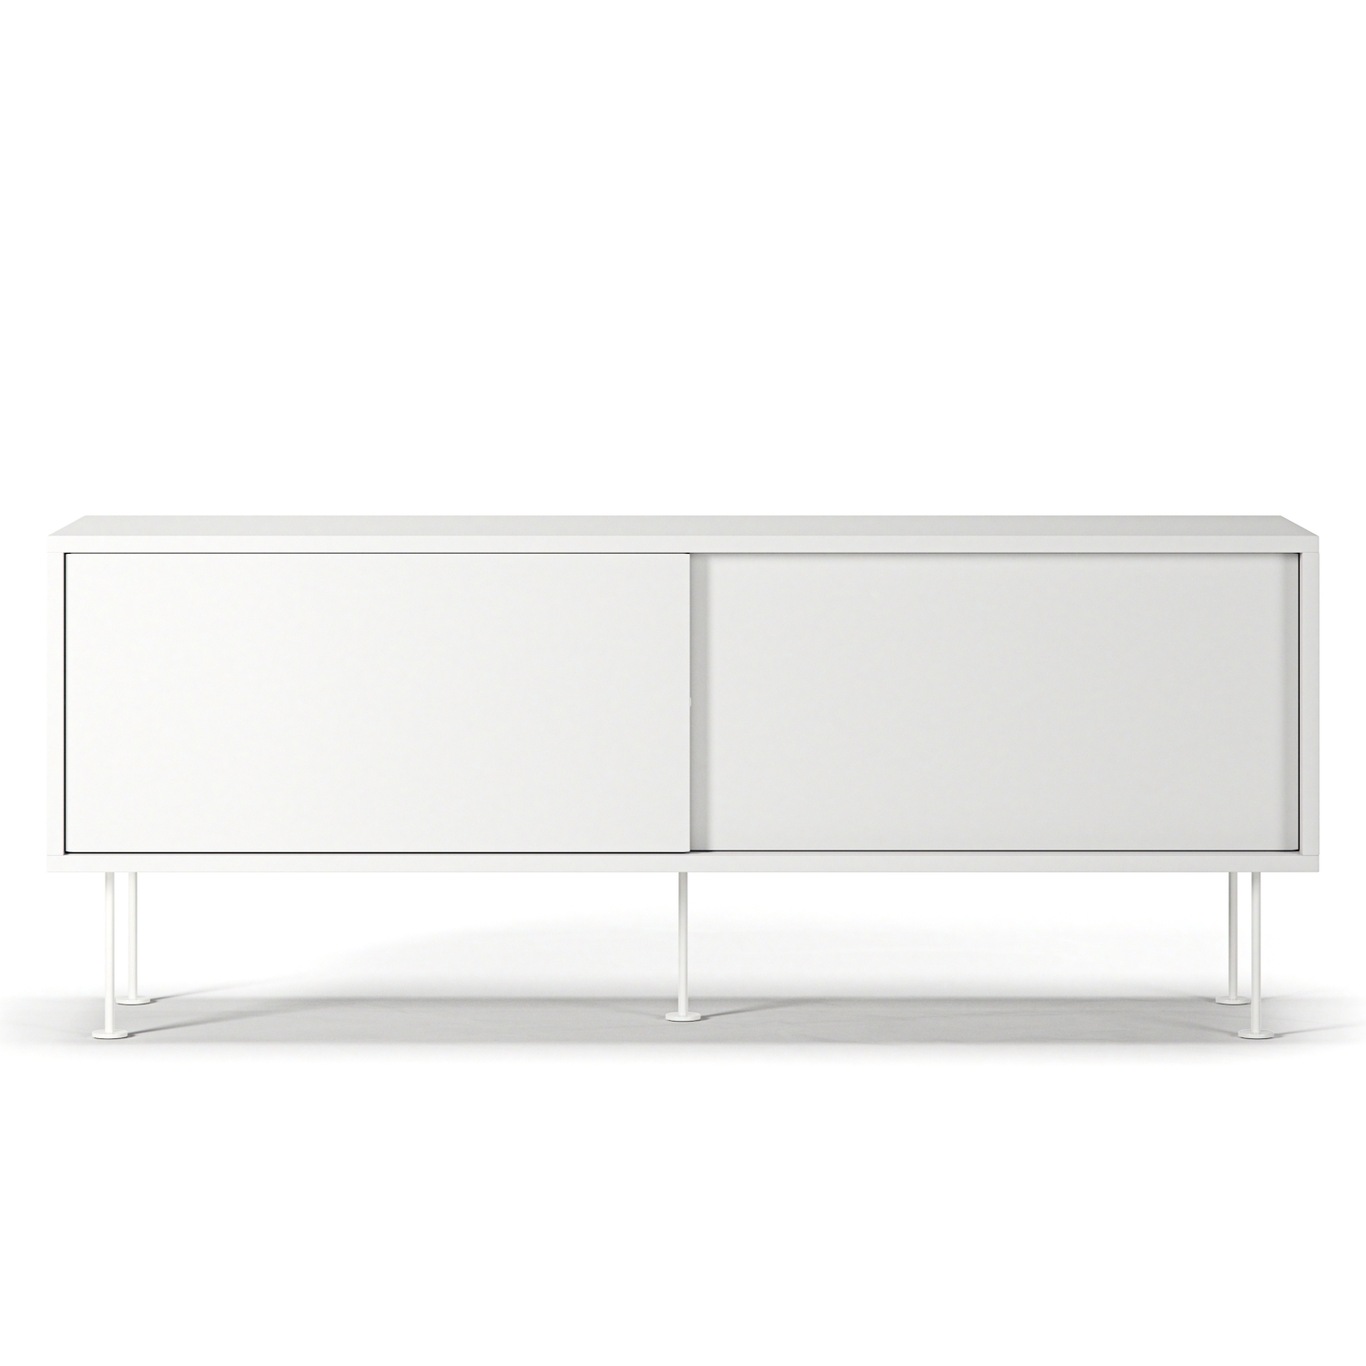 Vogue Media Bench With Legs 136 cm, White